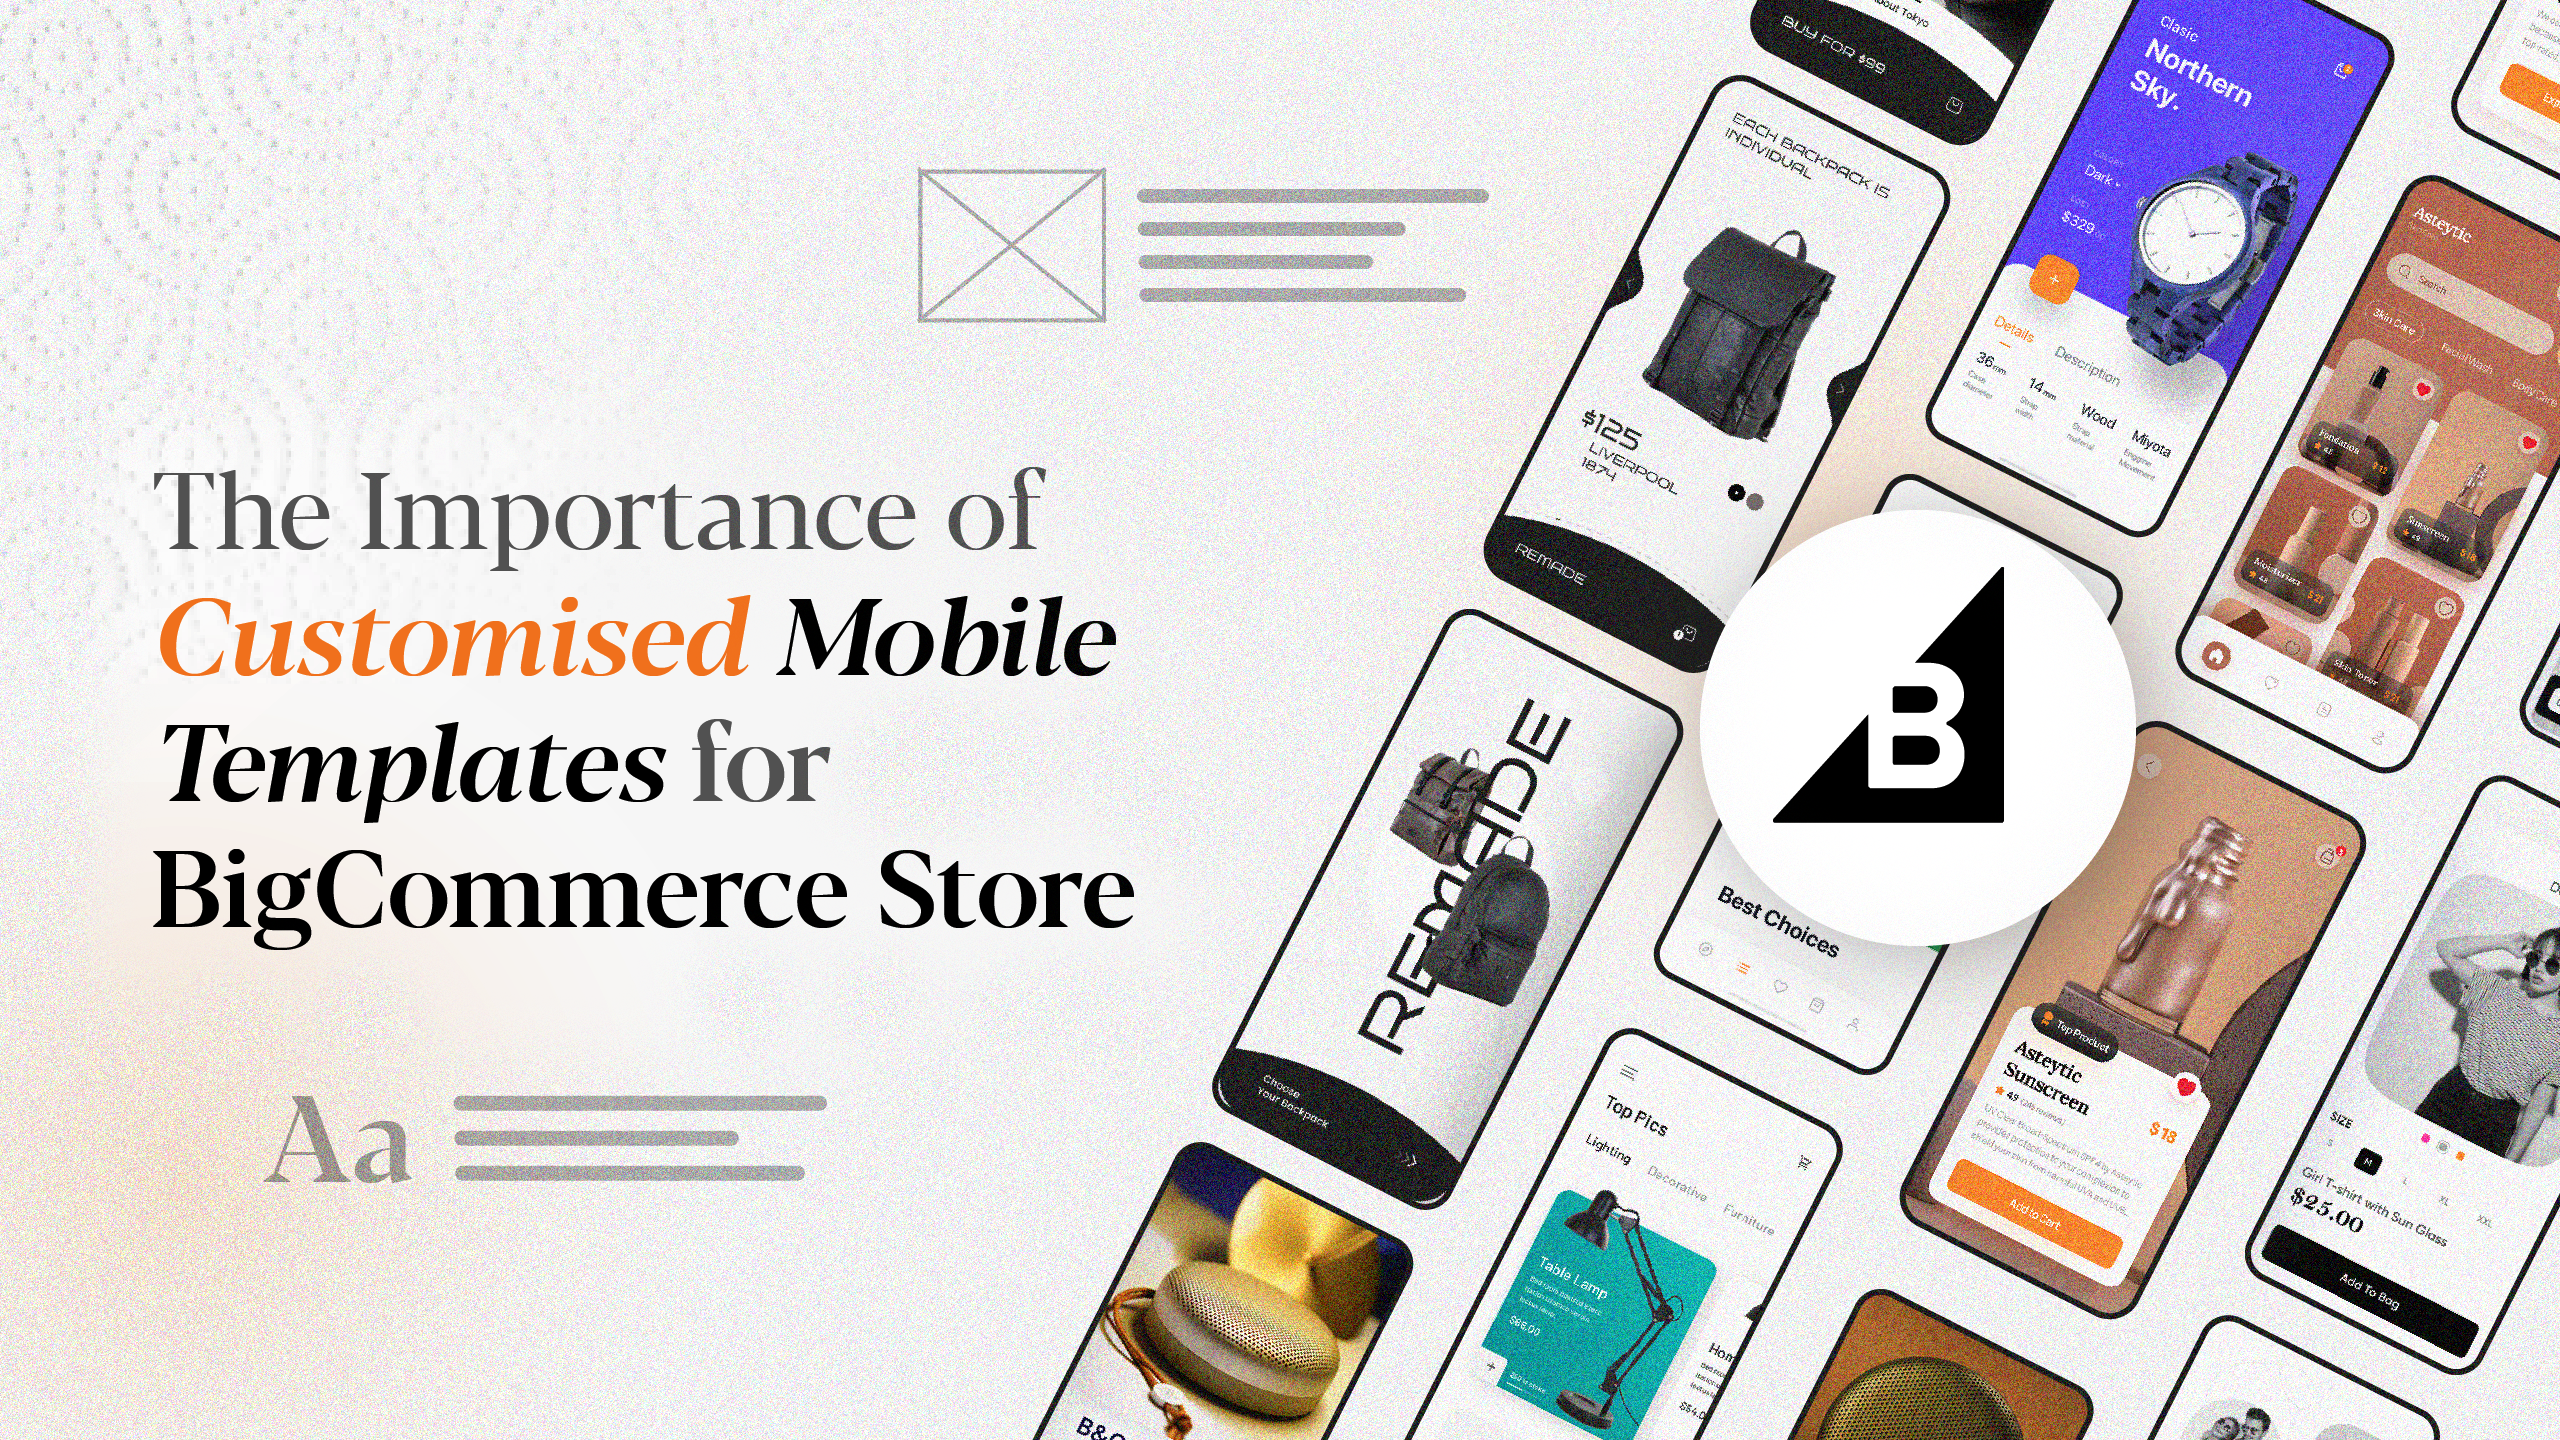 The Importance of Customised Mobile Templates for BigCommerce Store